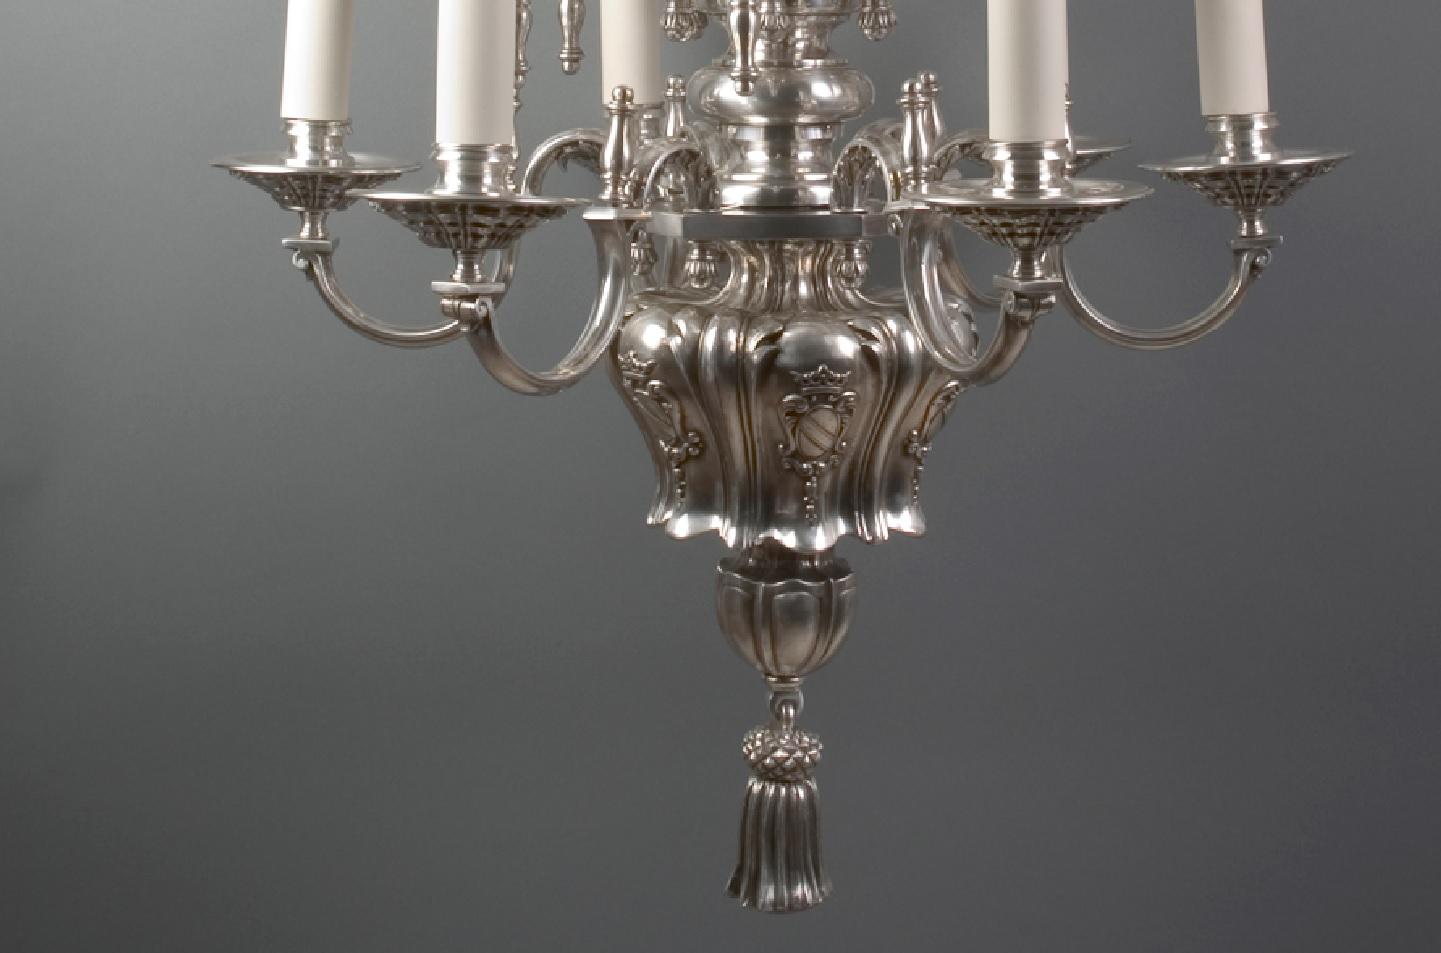 20th Century Twelve Arm Baroque Silverplate Chandelier by Pettingell Andrews Co. Circa 1910 For Sale